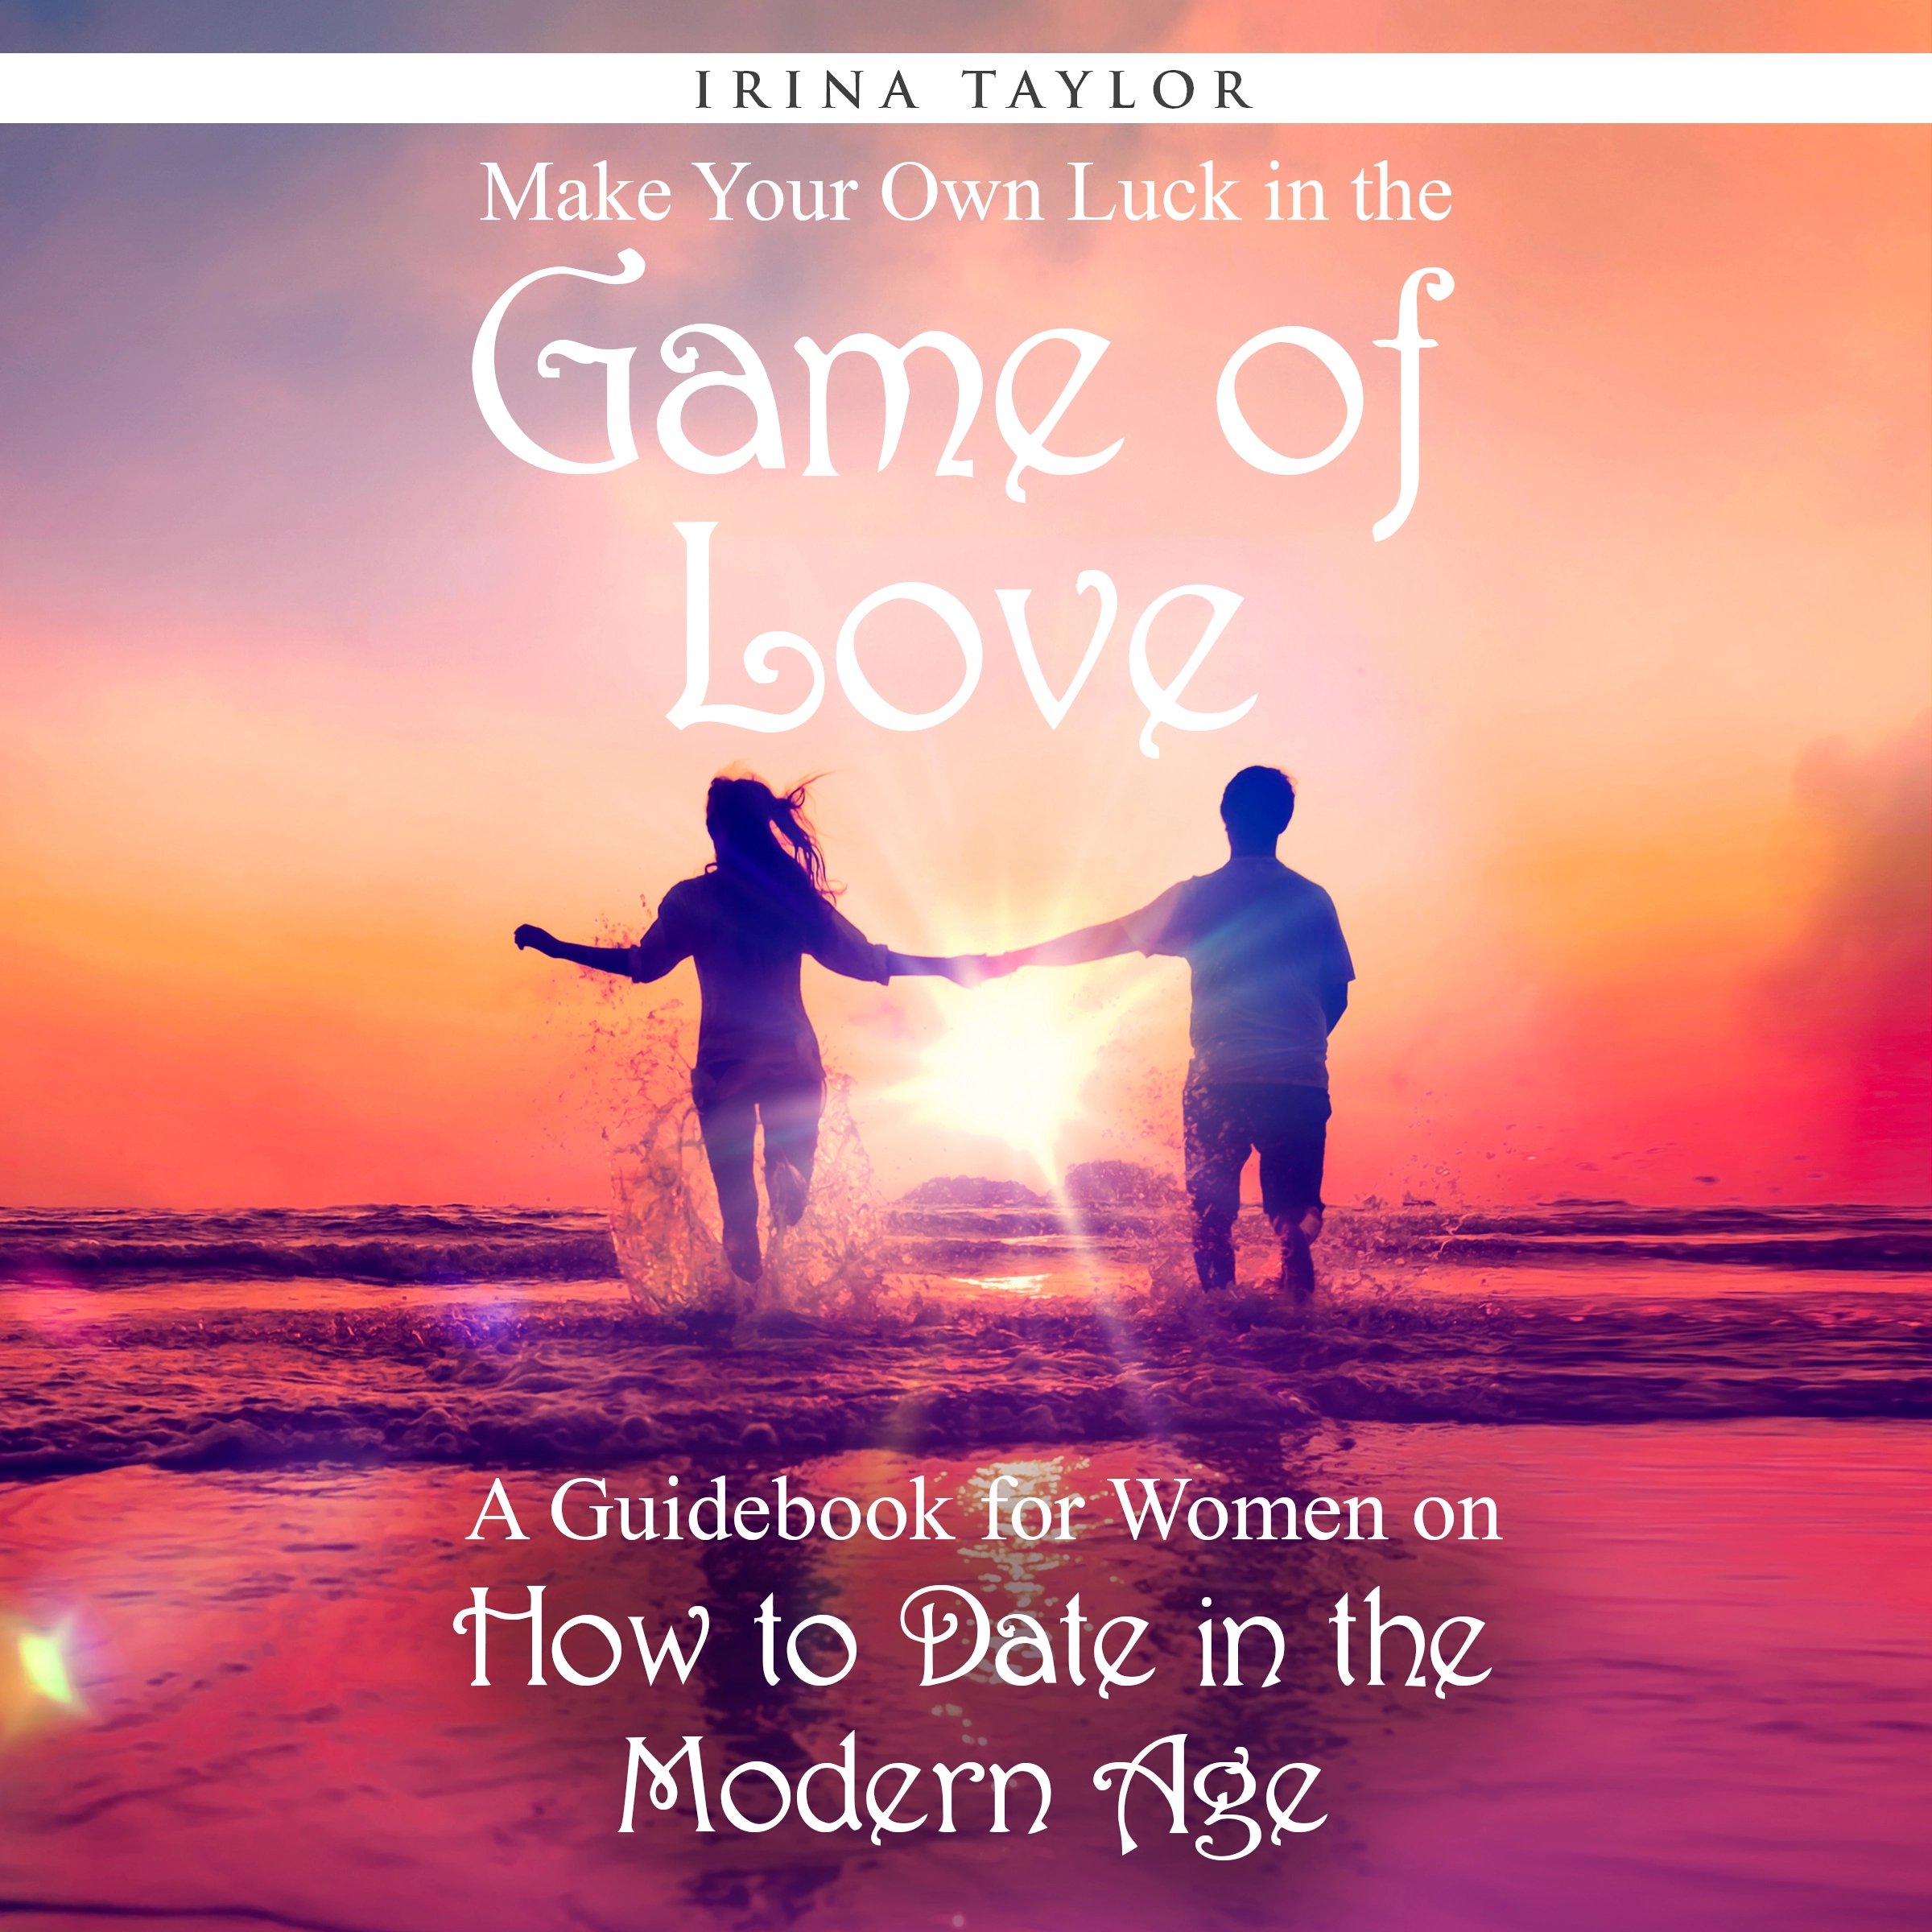 Make Your Own Luck in the Game of Love Audiobook by Irina Taylor